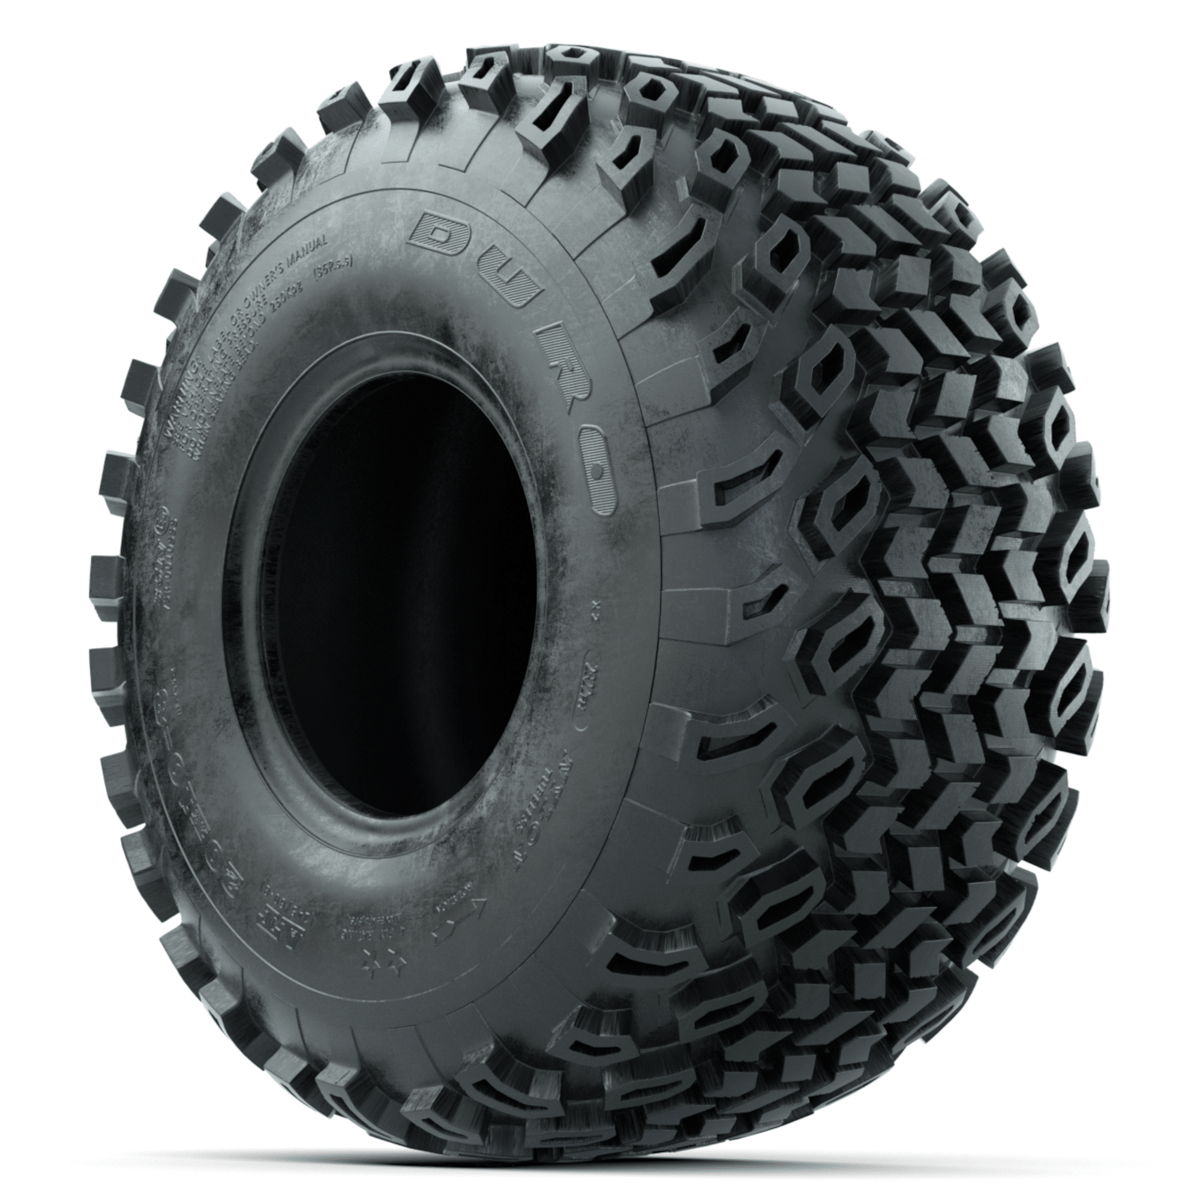 20x10-8 Duro Desert A/T Tire (Lift Required)